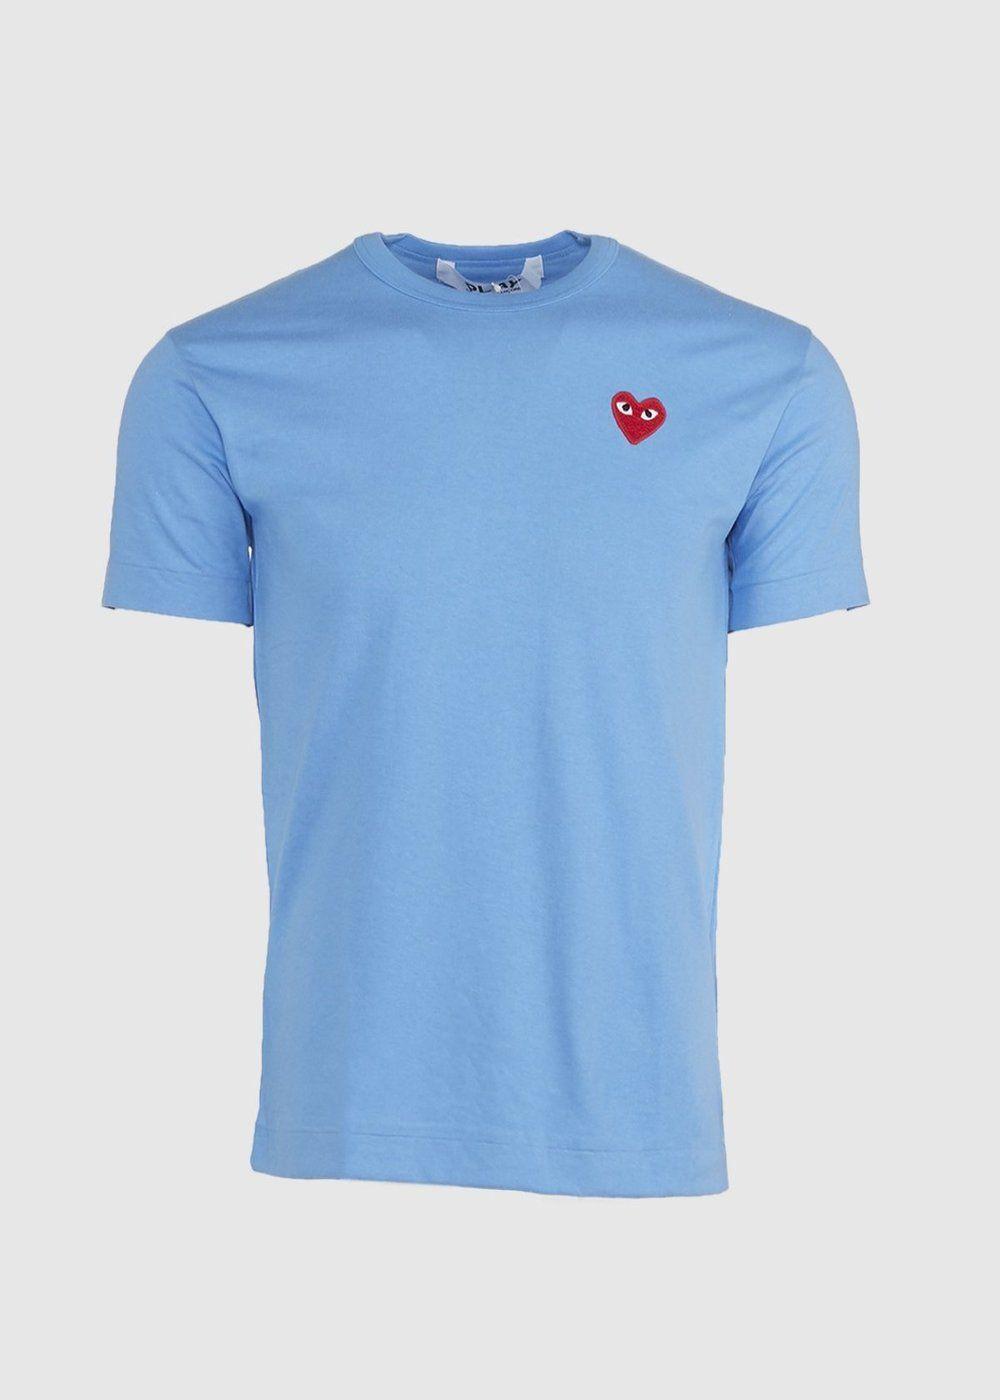 Short Red and Blue Logo - CDG PLAY: LOGO TEE SHORT SLEEVE [LIGHT BLUE/RED]